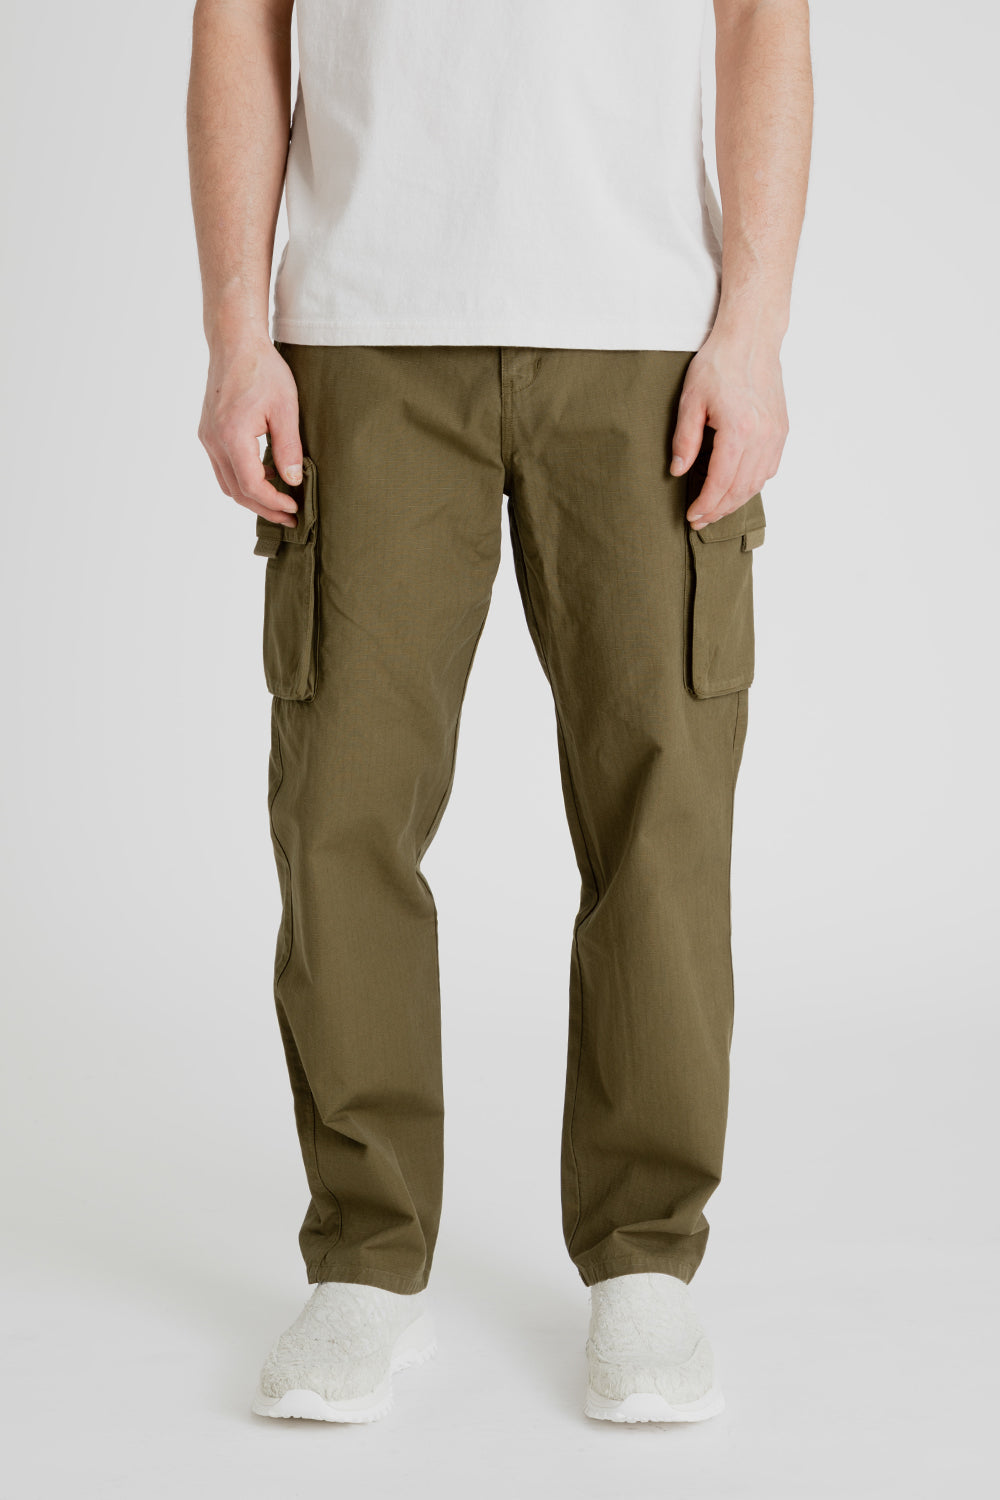 Foret Drip Cargo Pants in Army